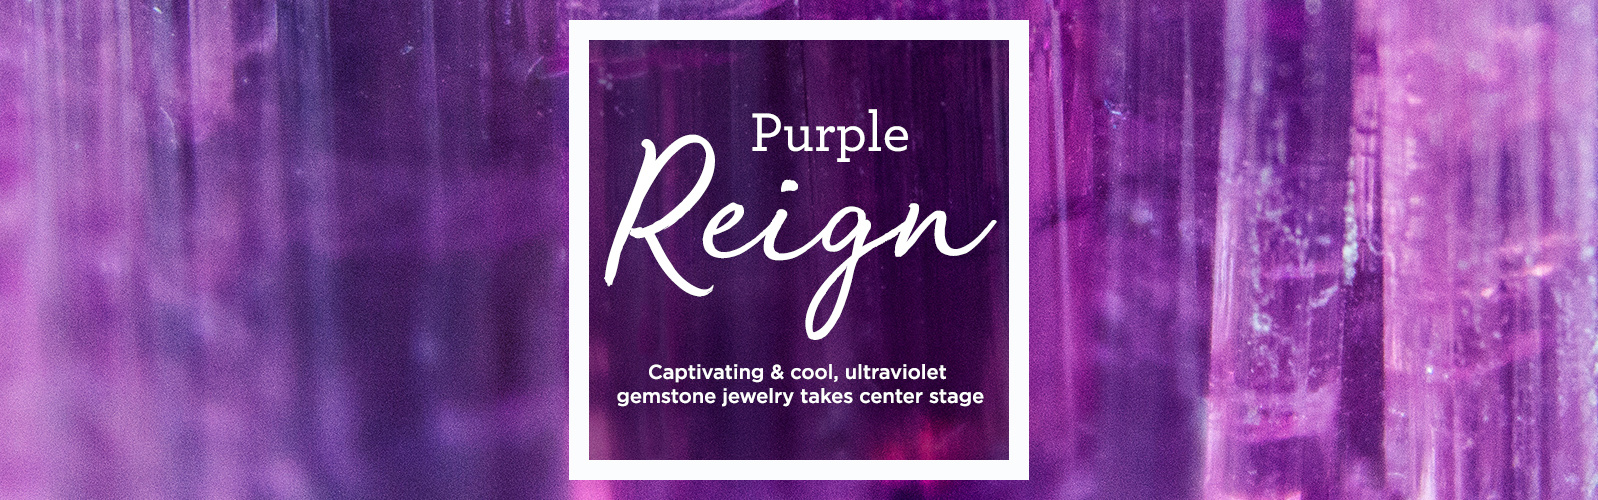 Purple Reign  Captivating & cool, ultraviolet gemstone jewelry takes center stage